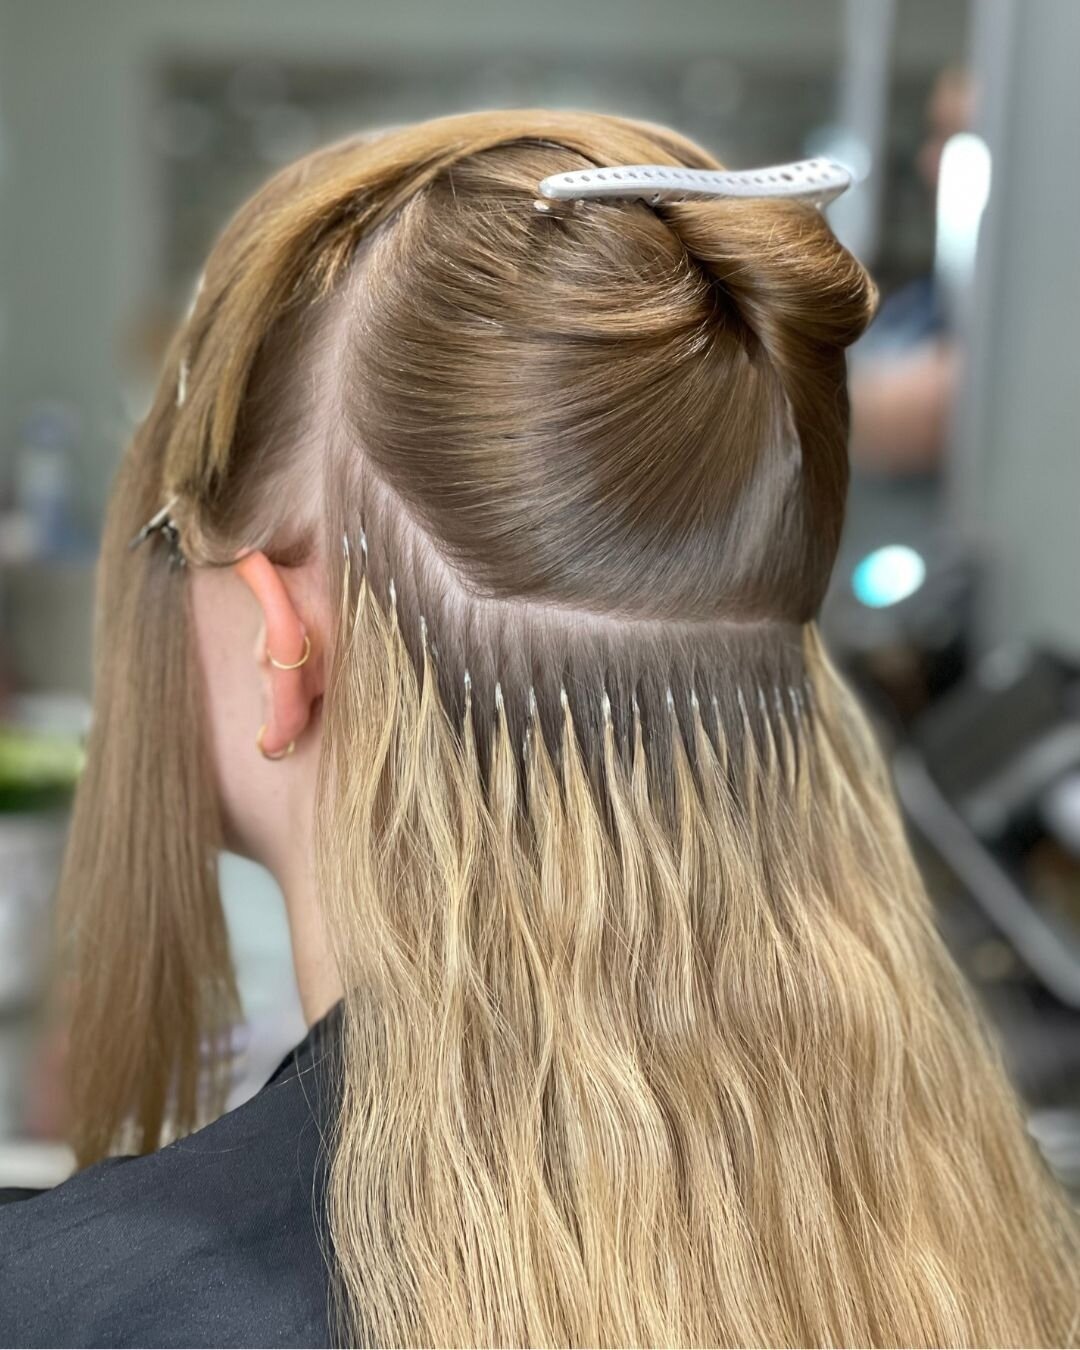 You've got to see the magic of luxury prebonded hair extensions up close! ✨⁠
⁠
These seamless extensions keep you feeling luscious for longer, so you have a good hair day - every day! Your hair deserves the best, and prebonded extensions are it &ndas